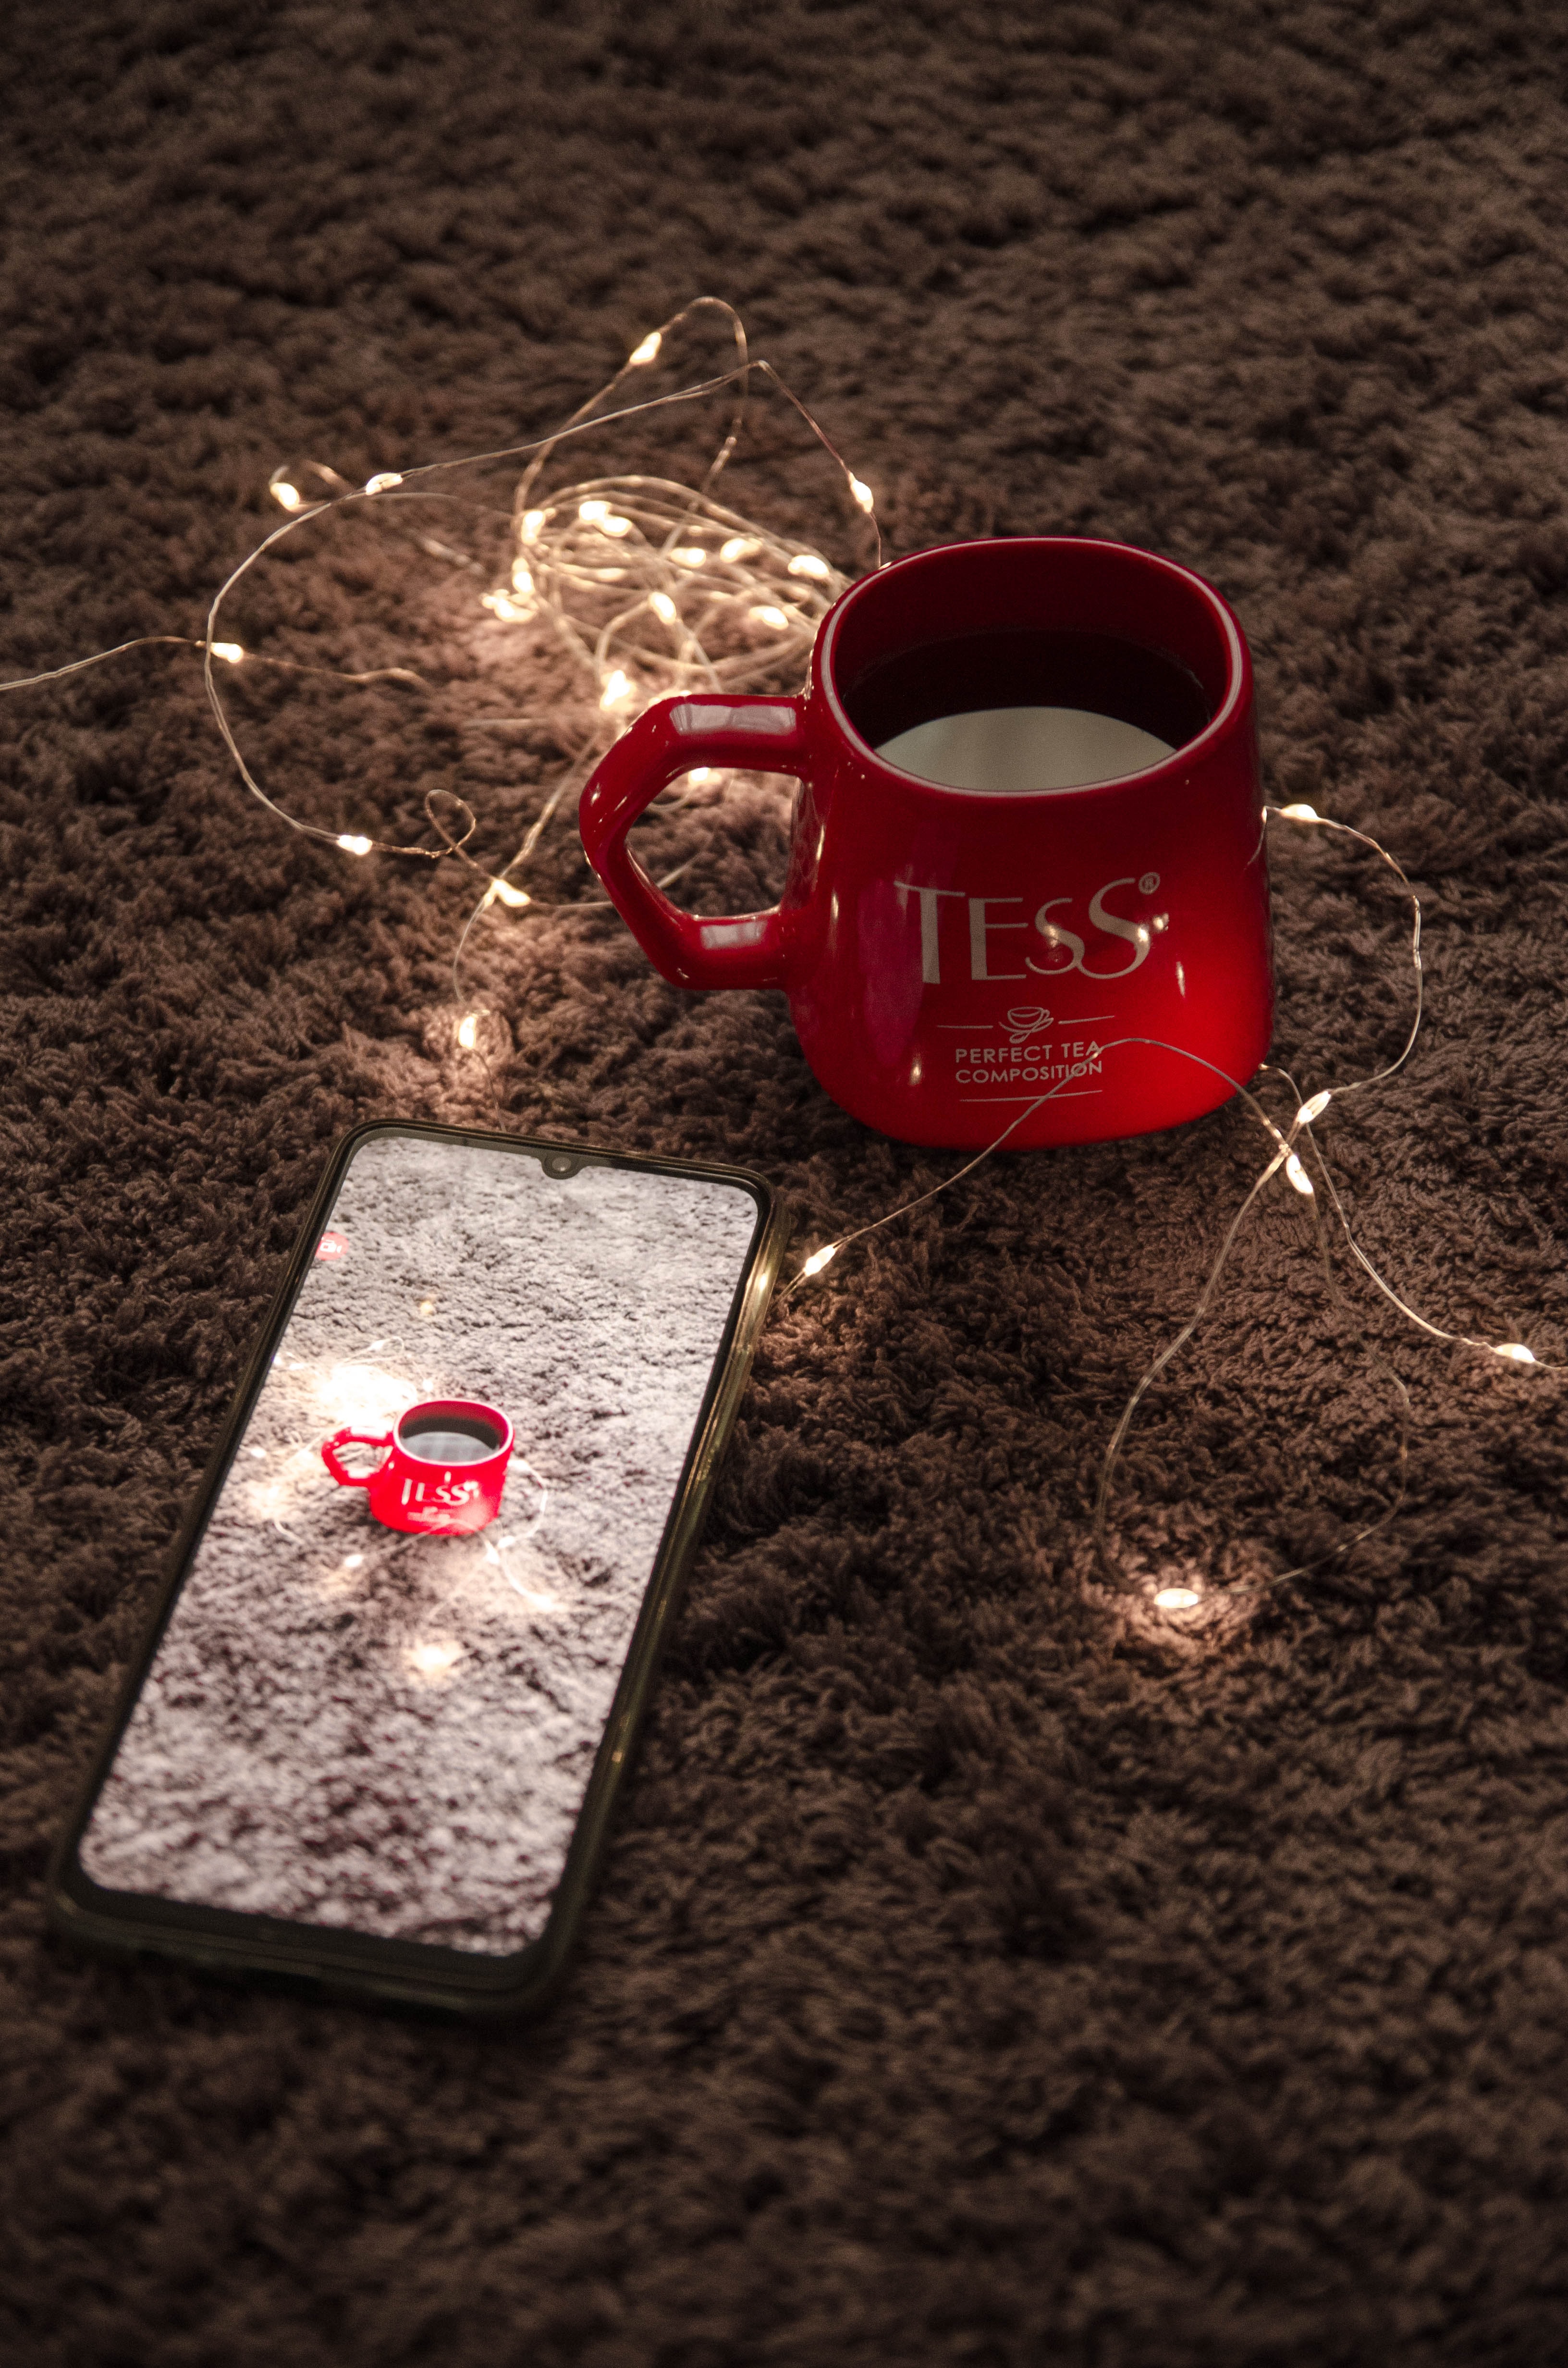 cup, mug, garland, miscellaneous, telephone, miscellanea, red